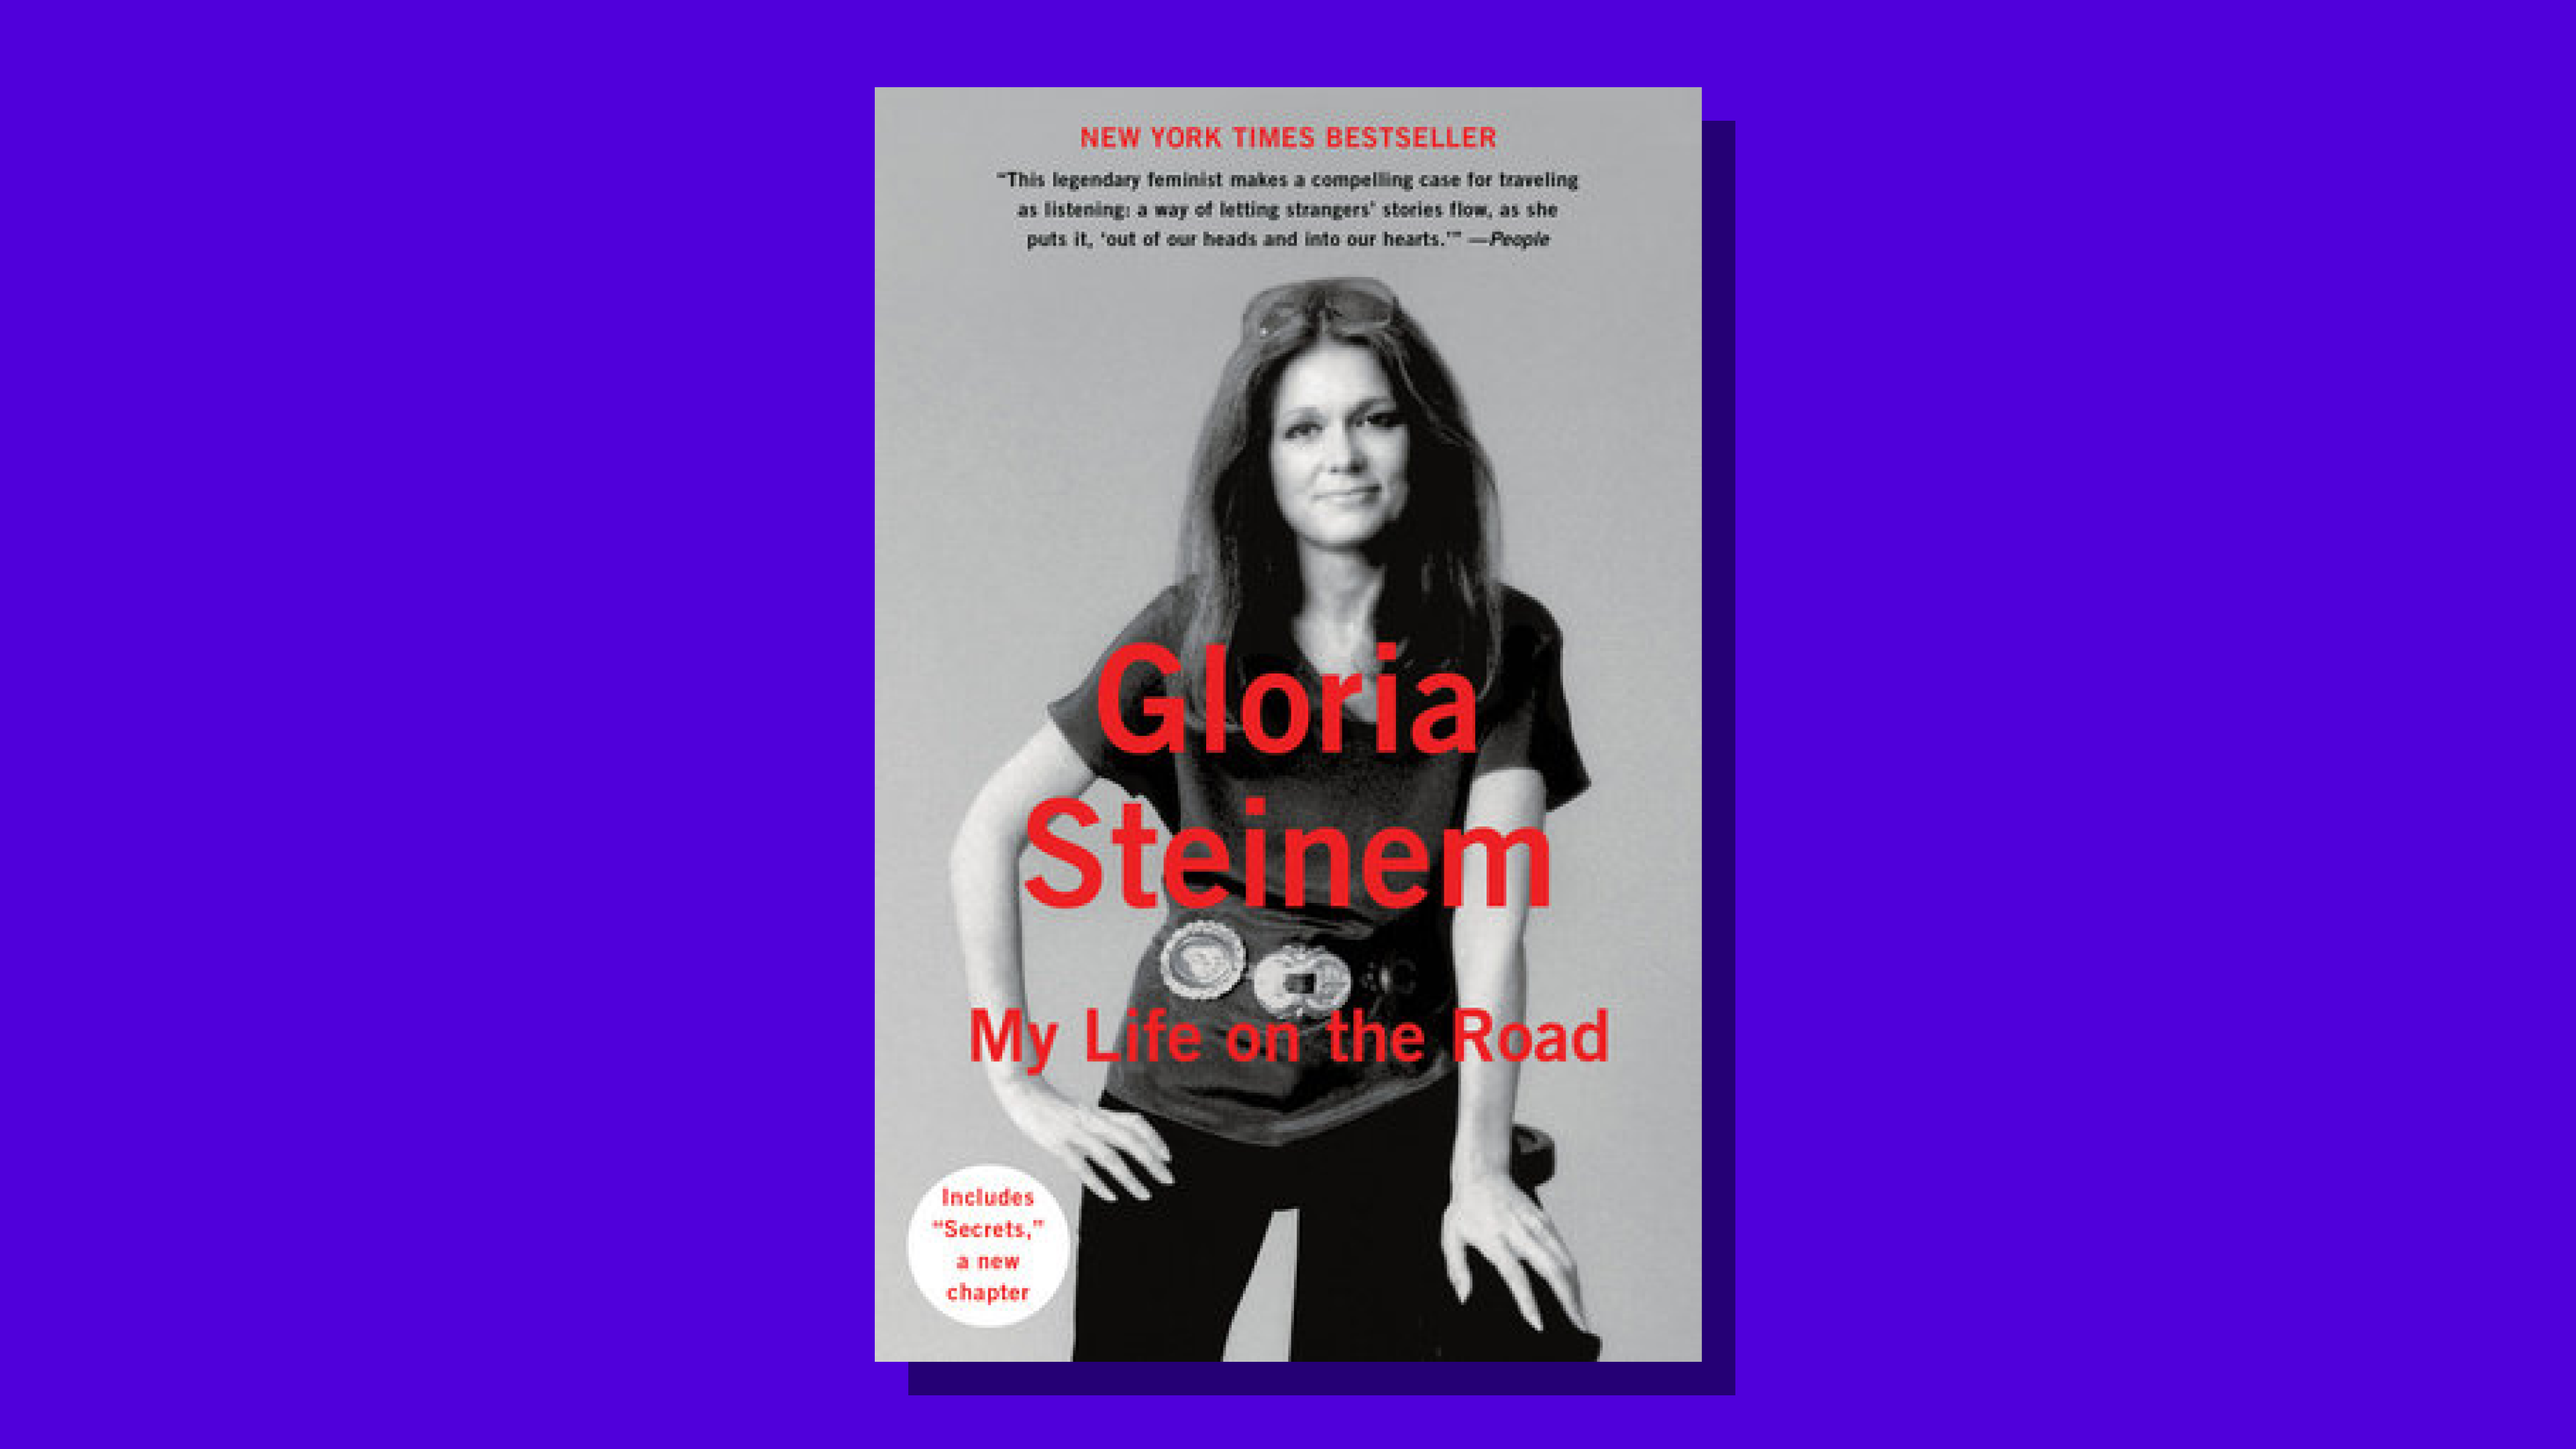 “My Life on the Road” by Gloria Steinem